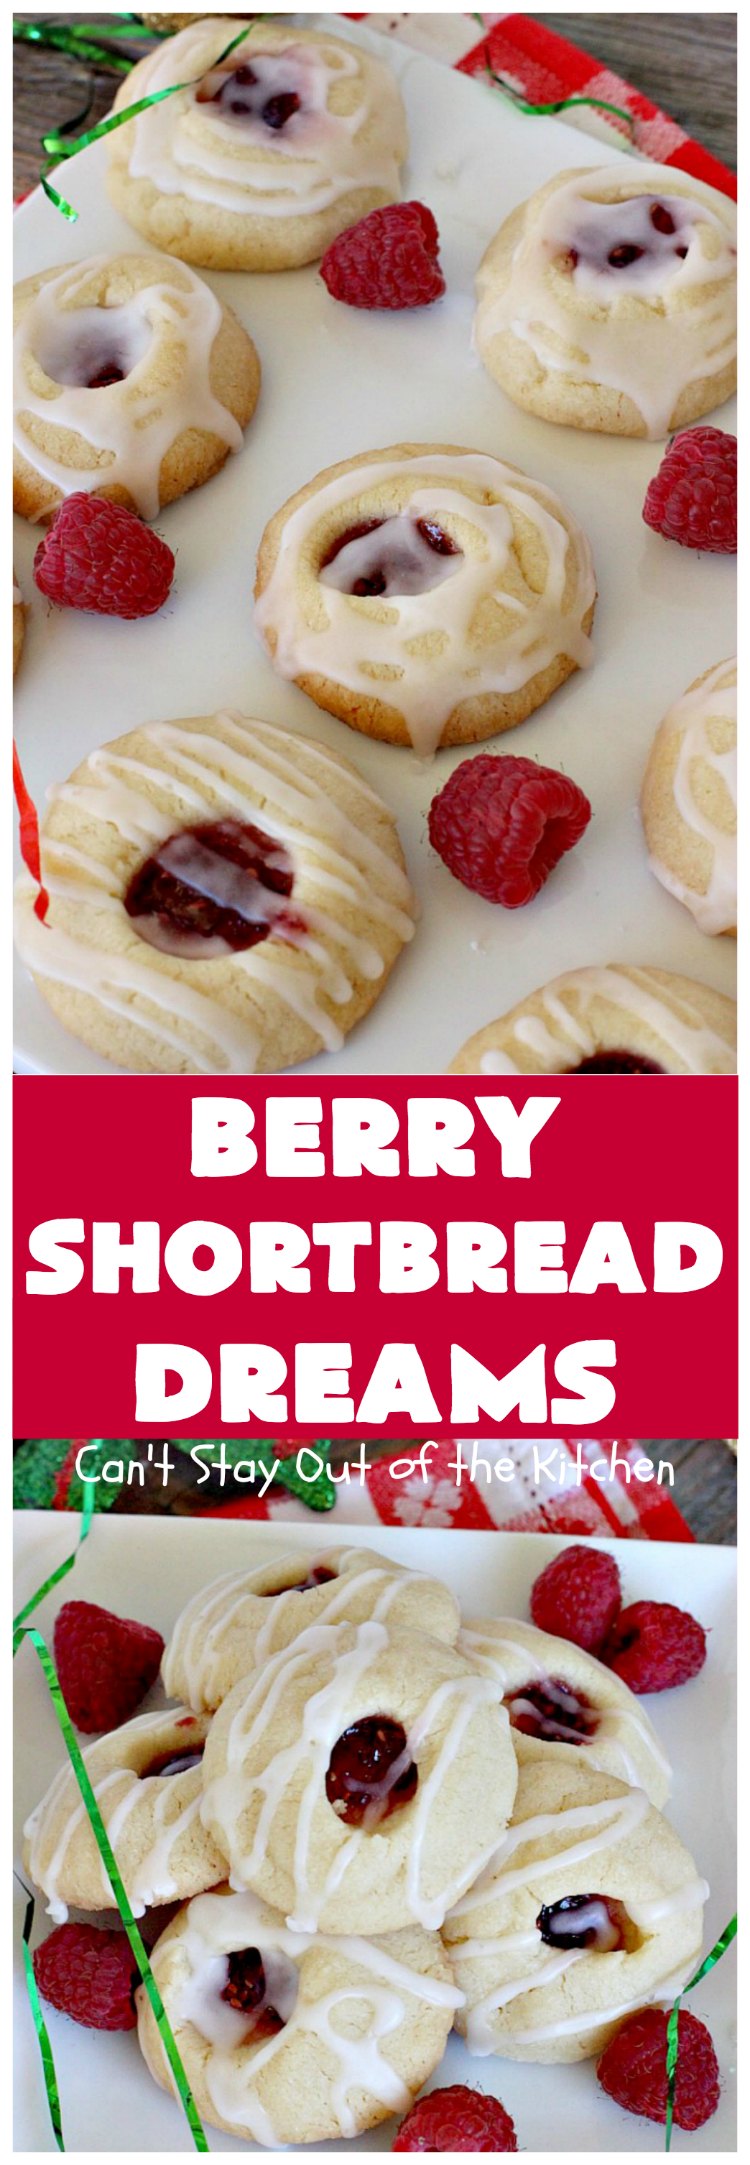 Berry Shortbread Dreams | Can't Stay Out of the Kitchen